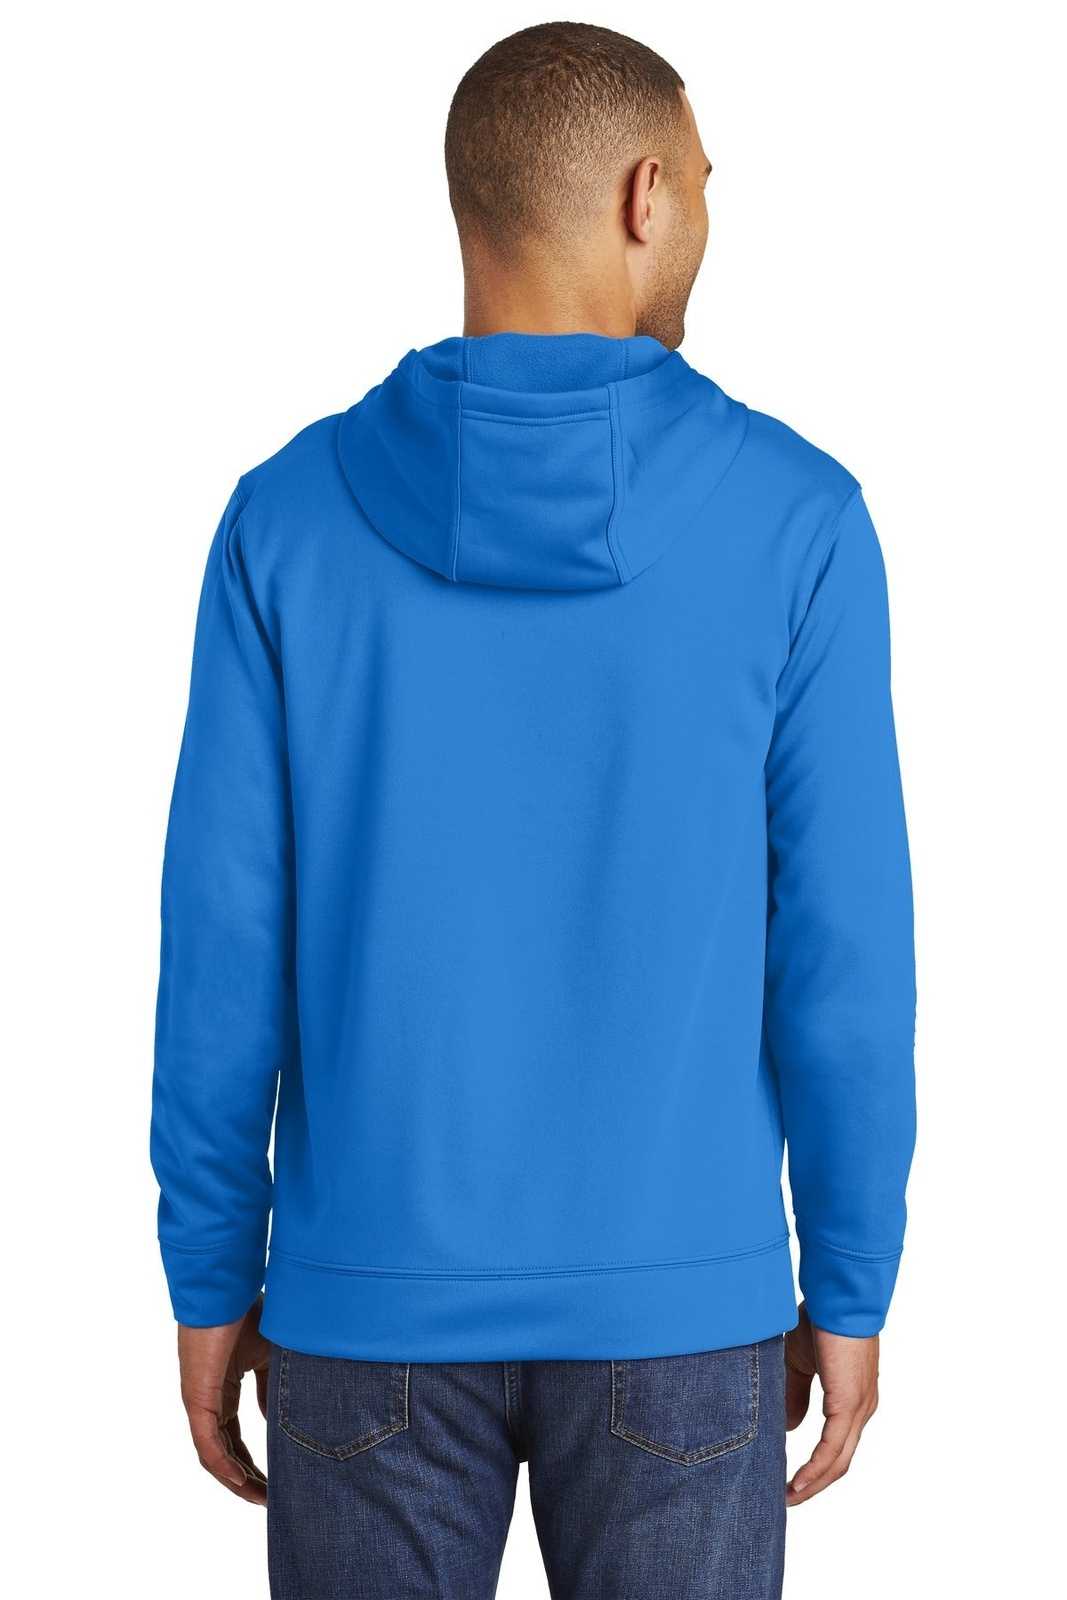 Port & Company PC590H Performance Fleece Pullover Hooded Sweatshirt - Royal - HIT a Double - 1